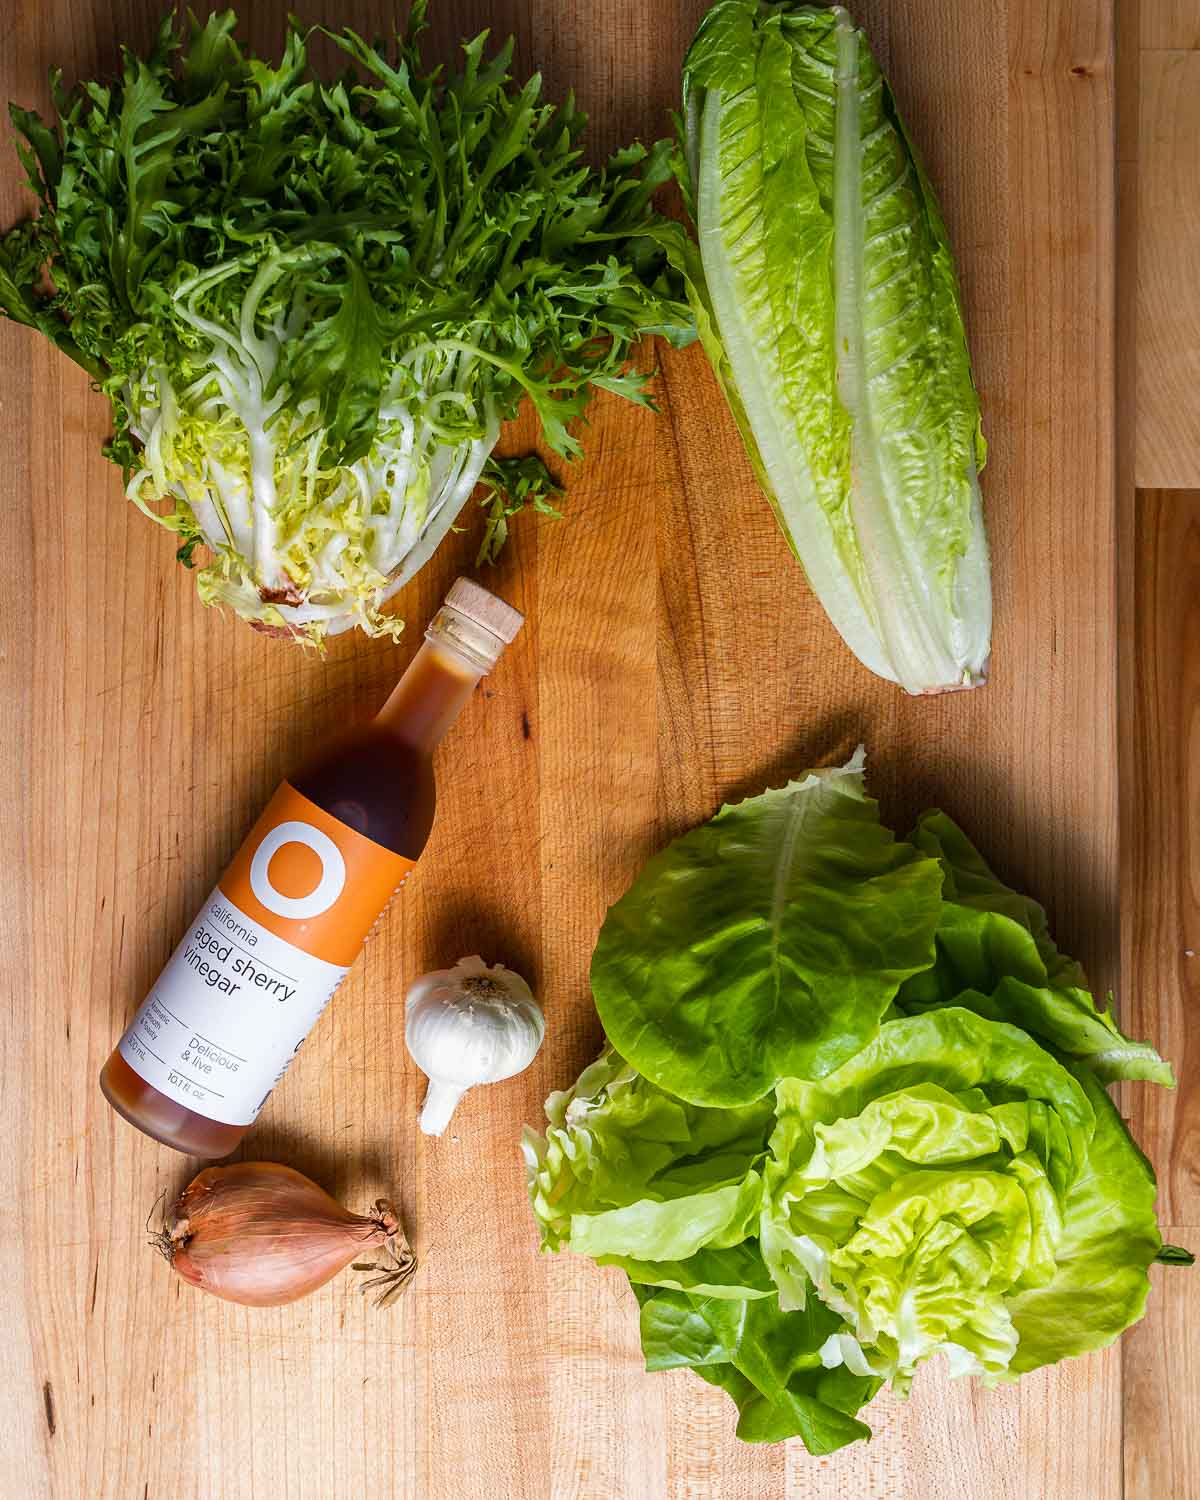 Ingredients shown: frisee, romaine, and Boston lettuce along with bottle of sherry vinegar, head of garlic, and shallot.